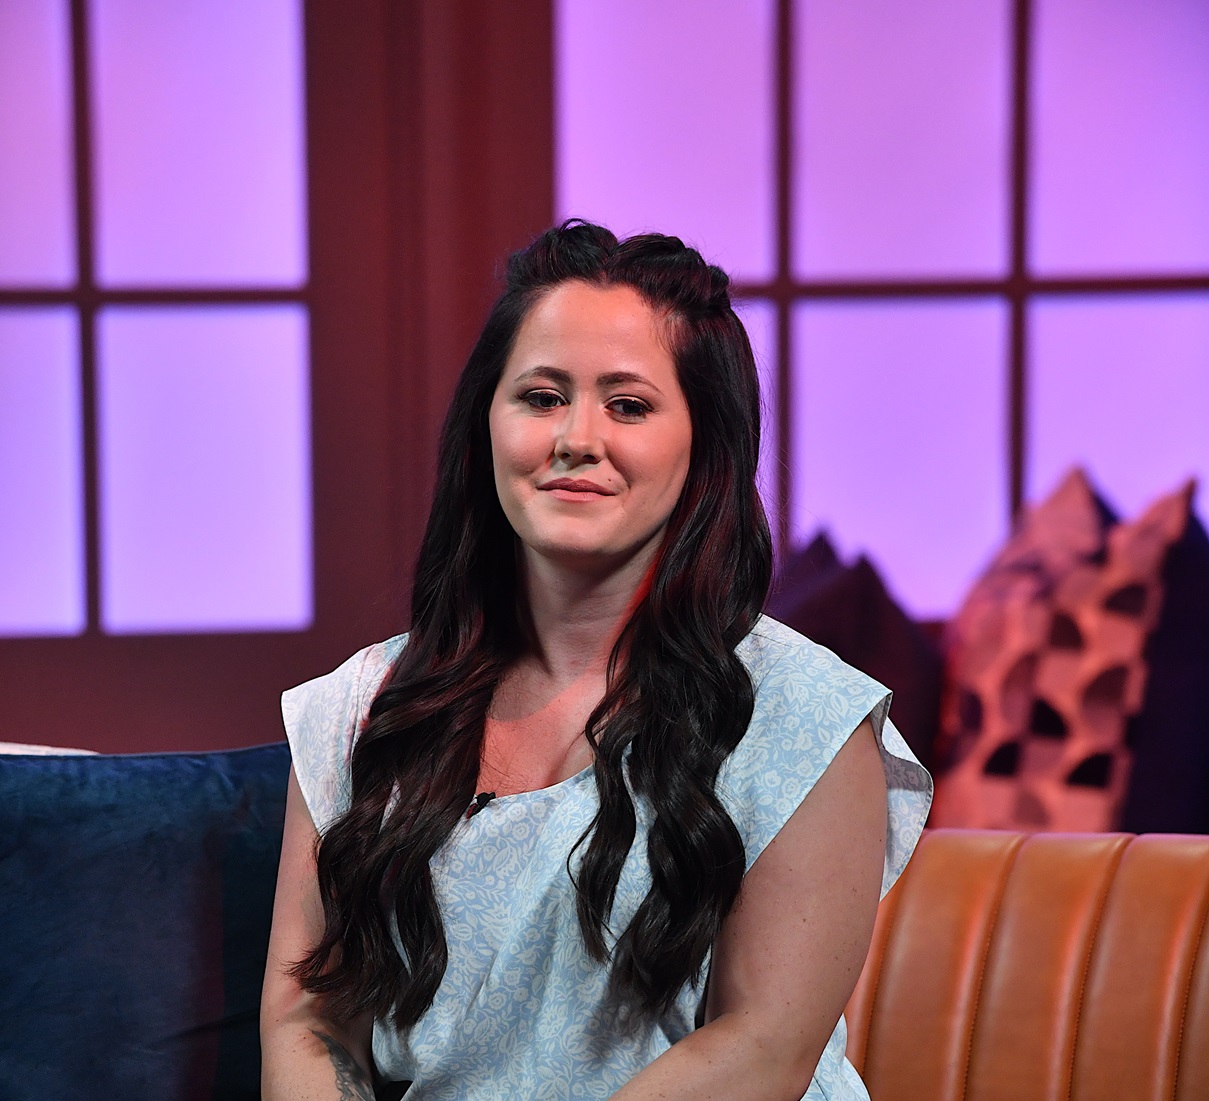 Jenelle Evans is seen on the set of "Candace" on May 24, 2021 in Nashville, Tennessee